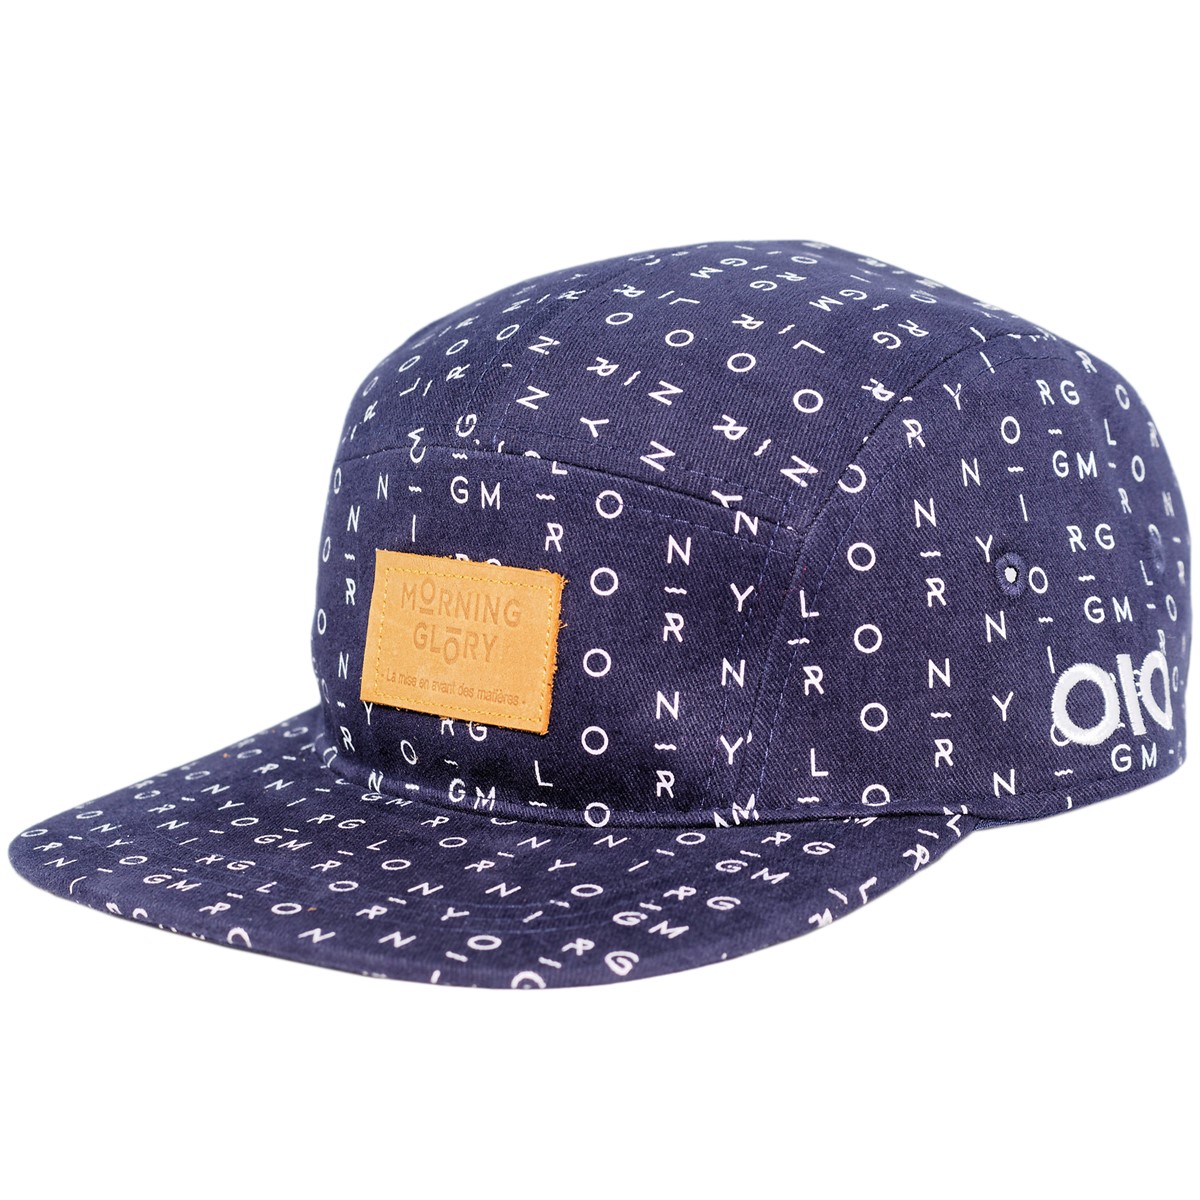 Casquette 5 Panel Morning Glory Vole Morning Glory